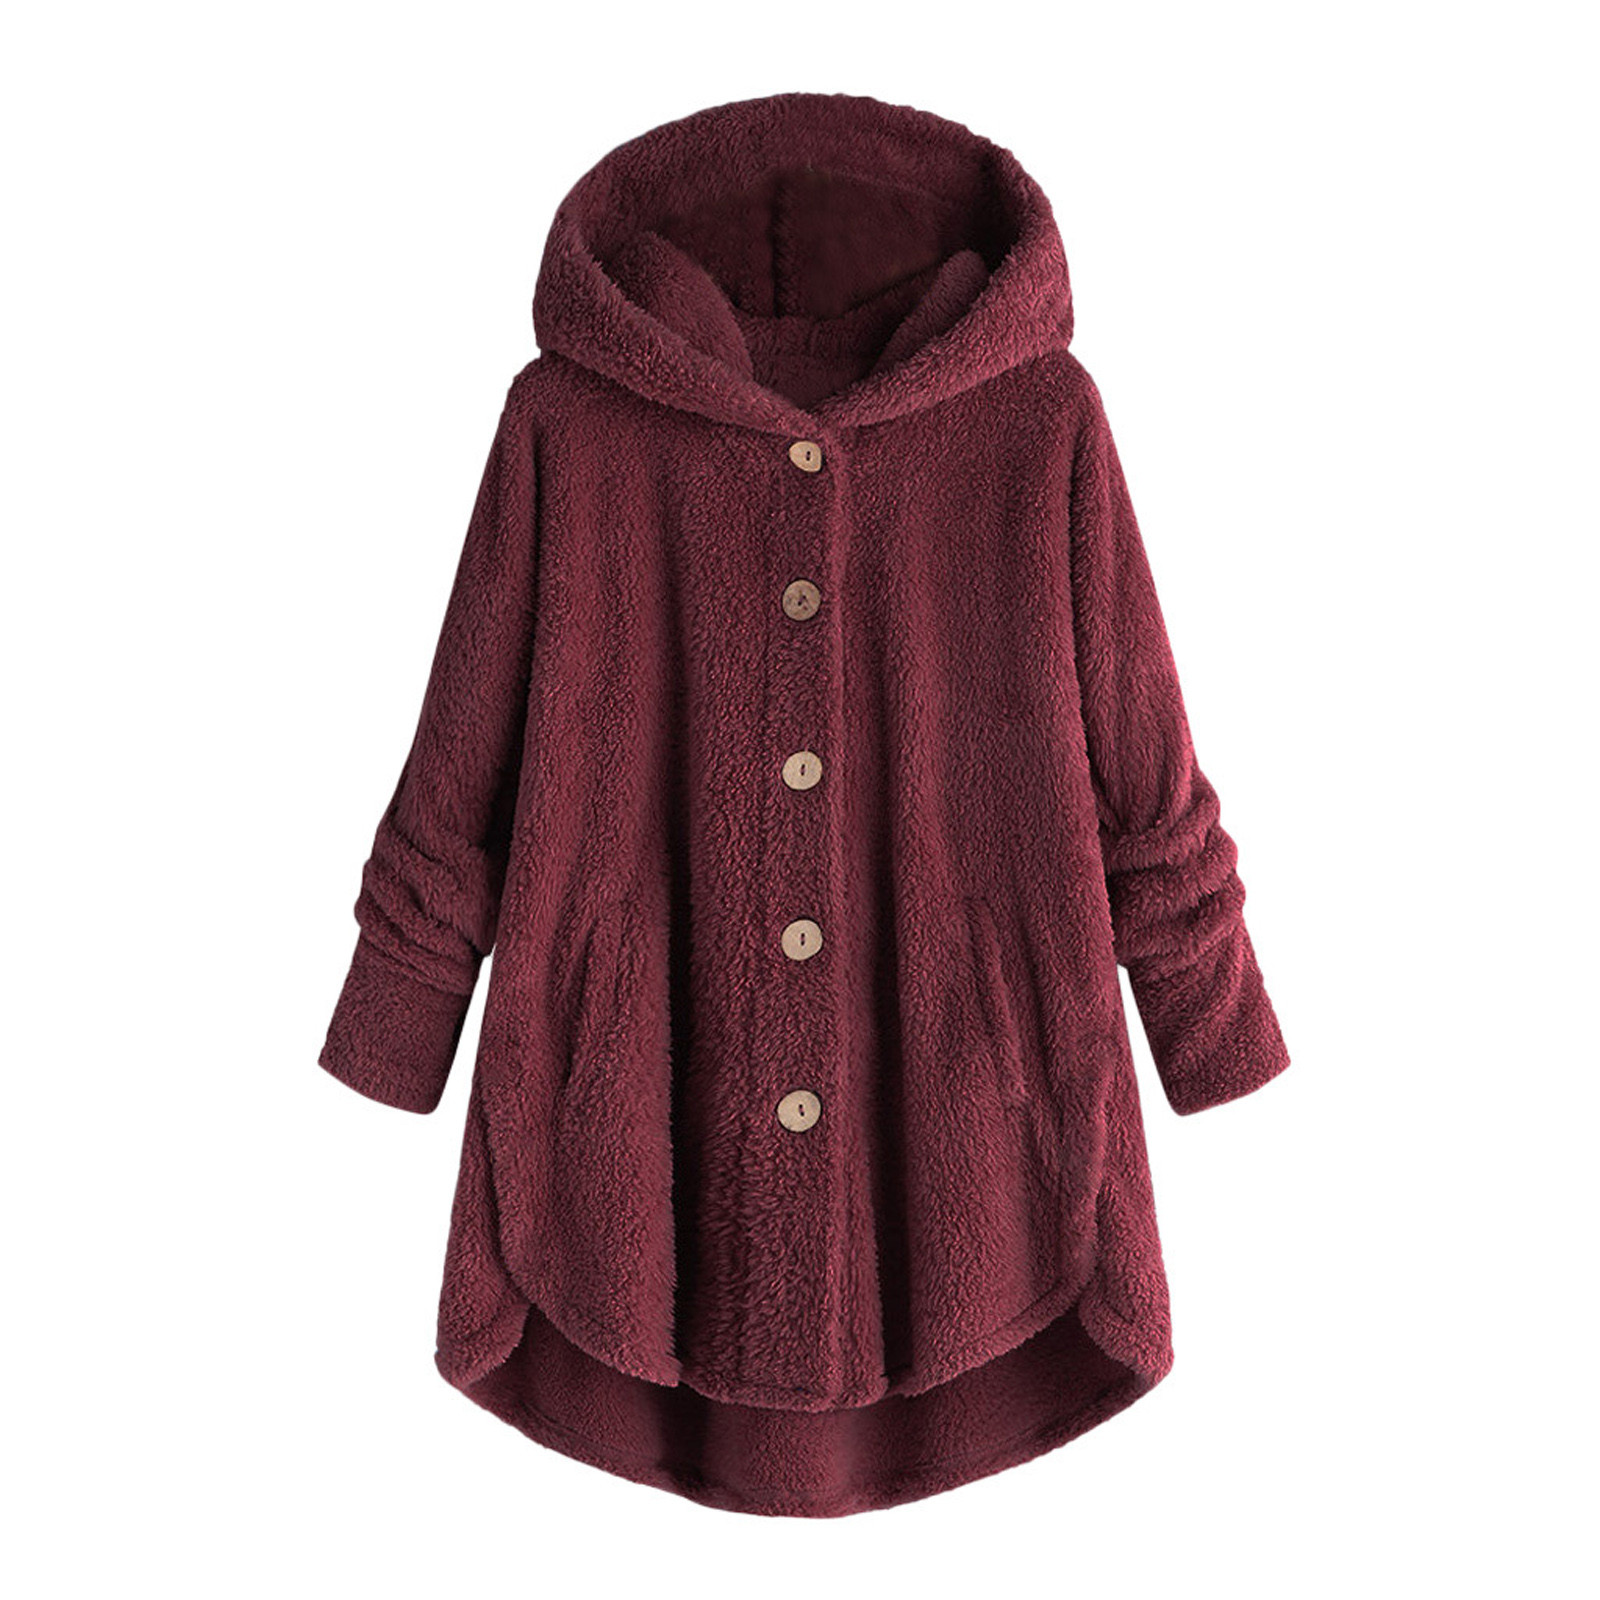 Coats Women Plus Size Button Plush Tops Hooded Loose Wool Coat Winter Keep Warm Pockets Chaqueton Mujer Best Sale